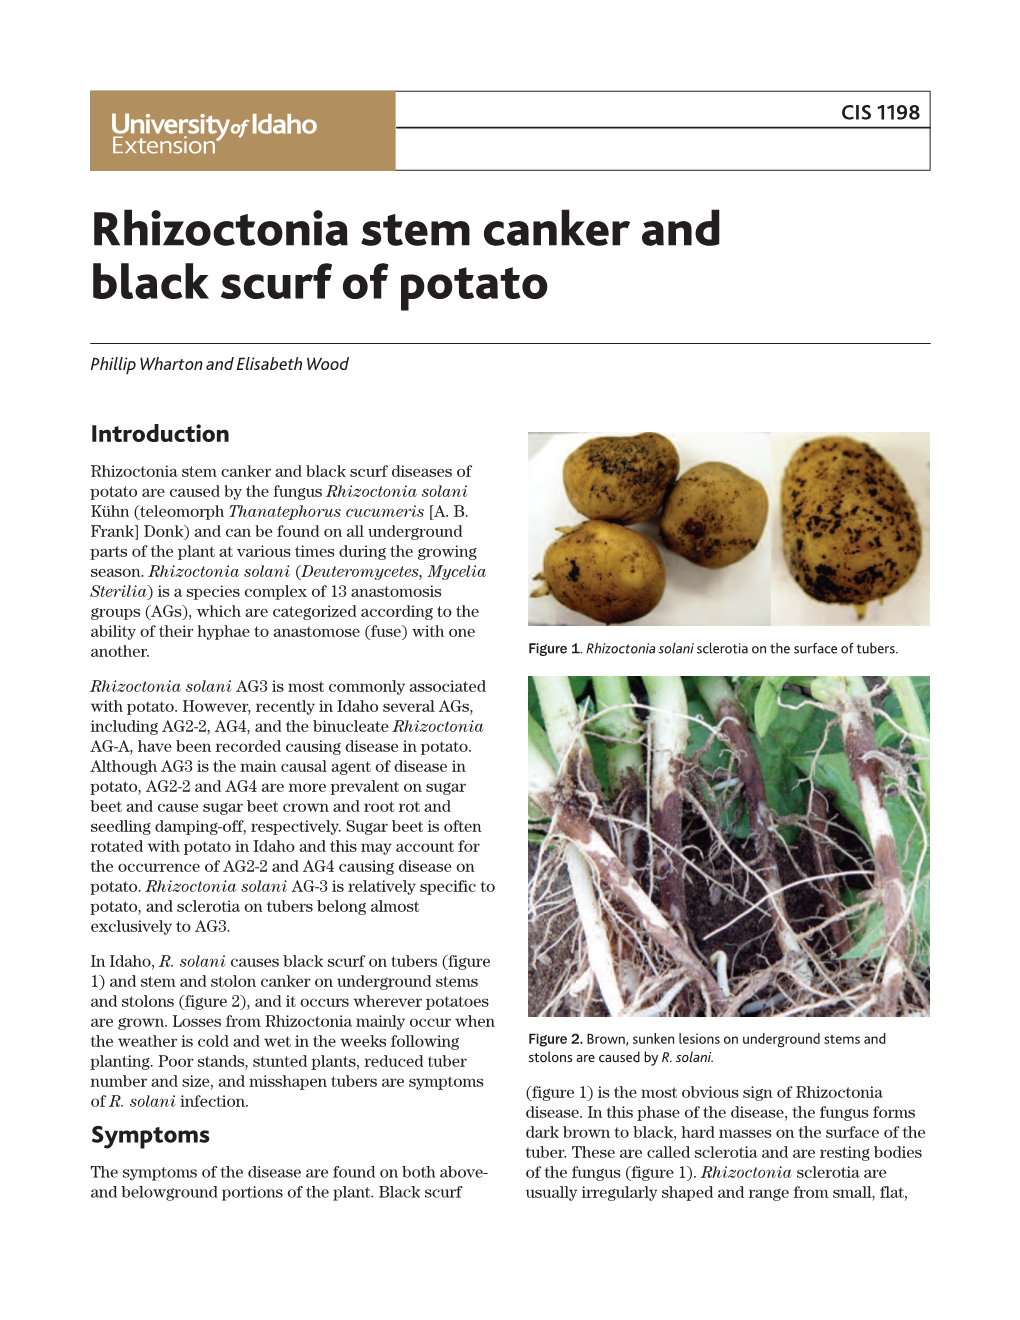 Rhizoctonia Stem Canker and Black Scurf of Potato